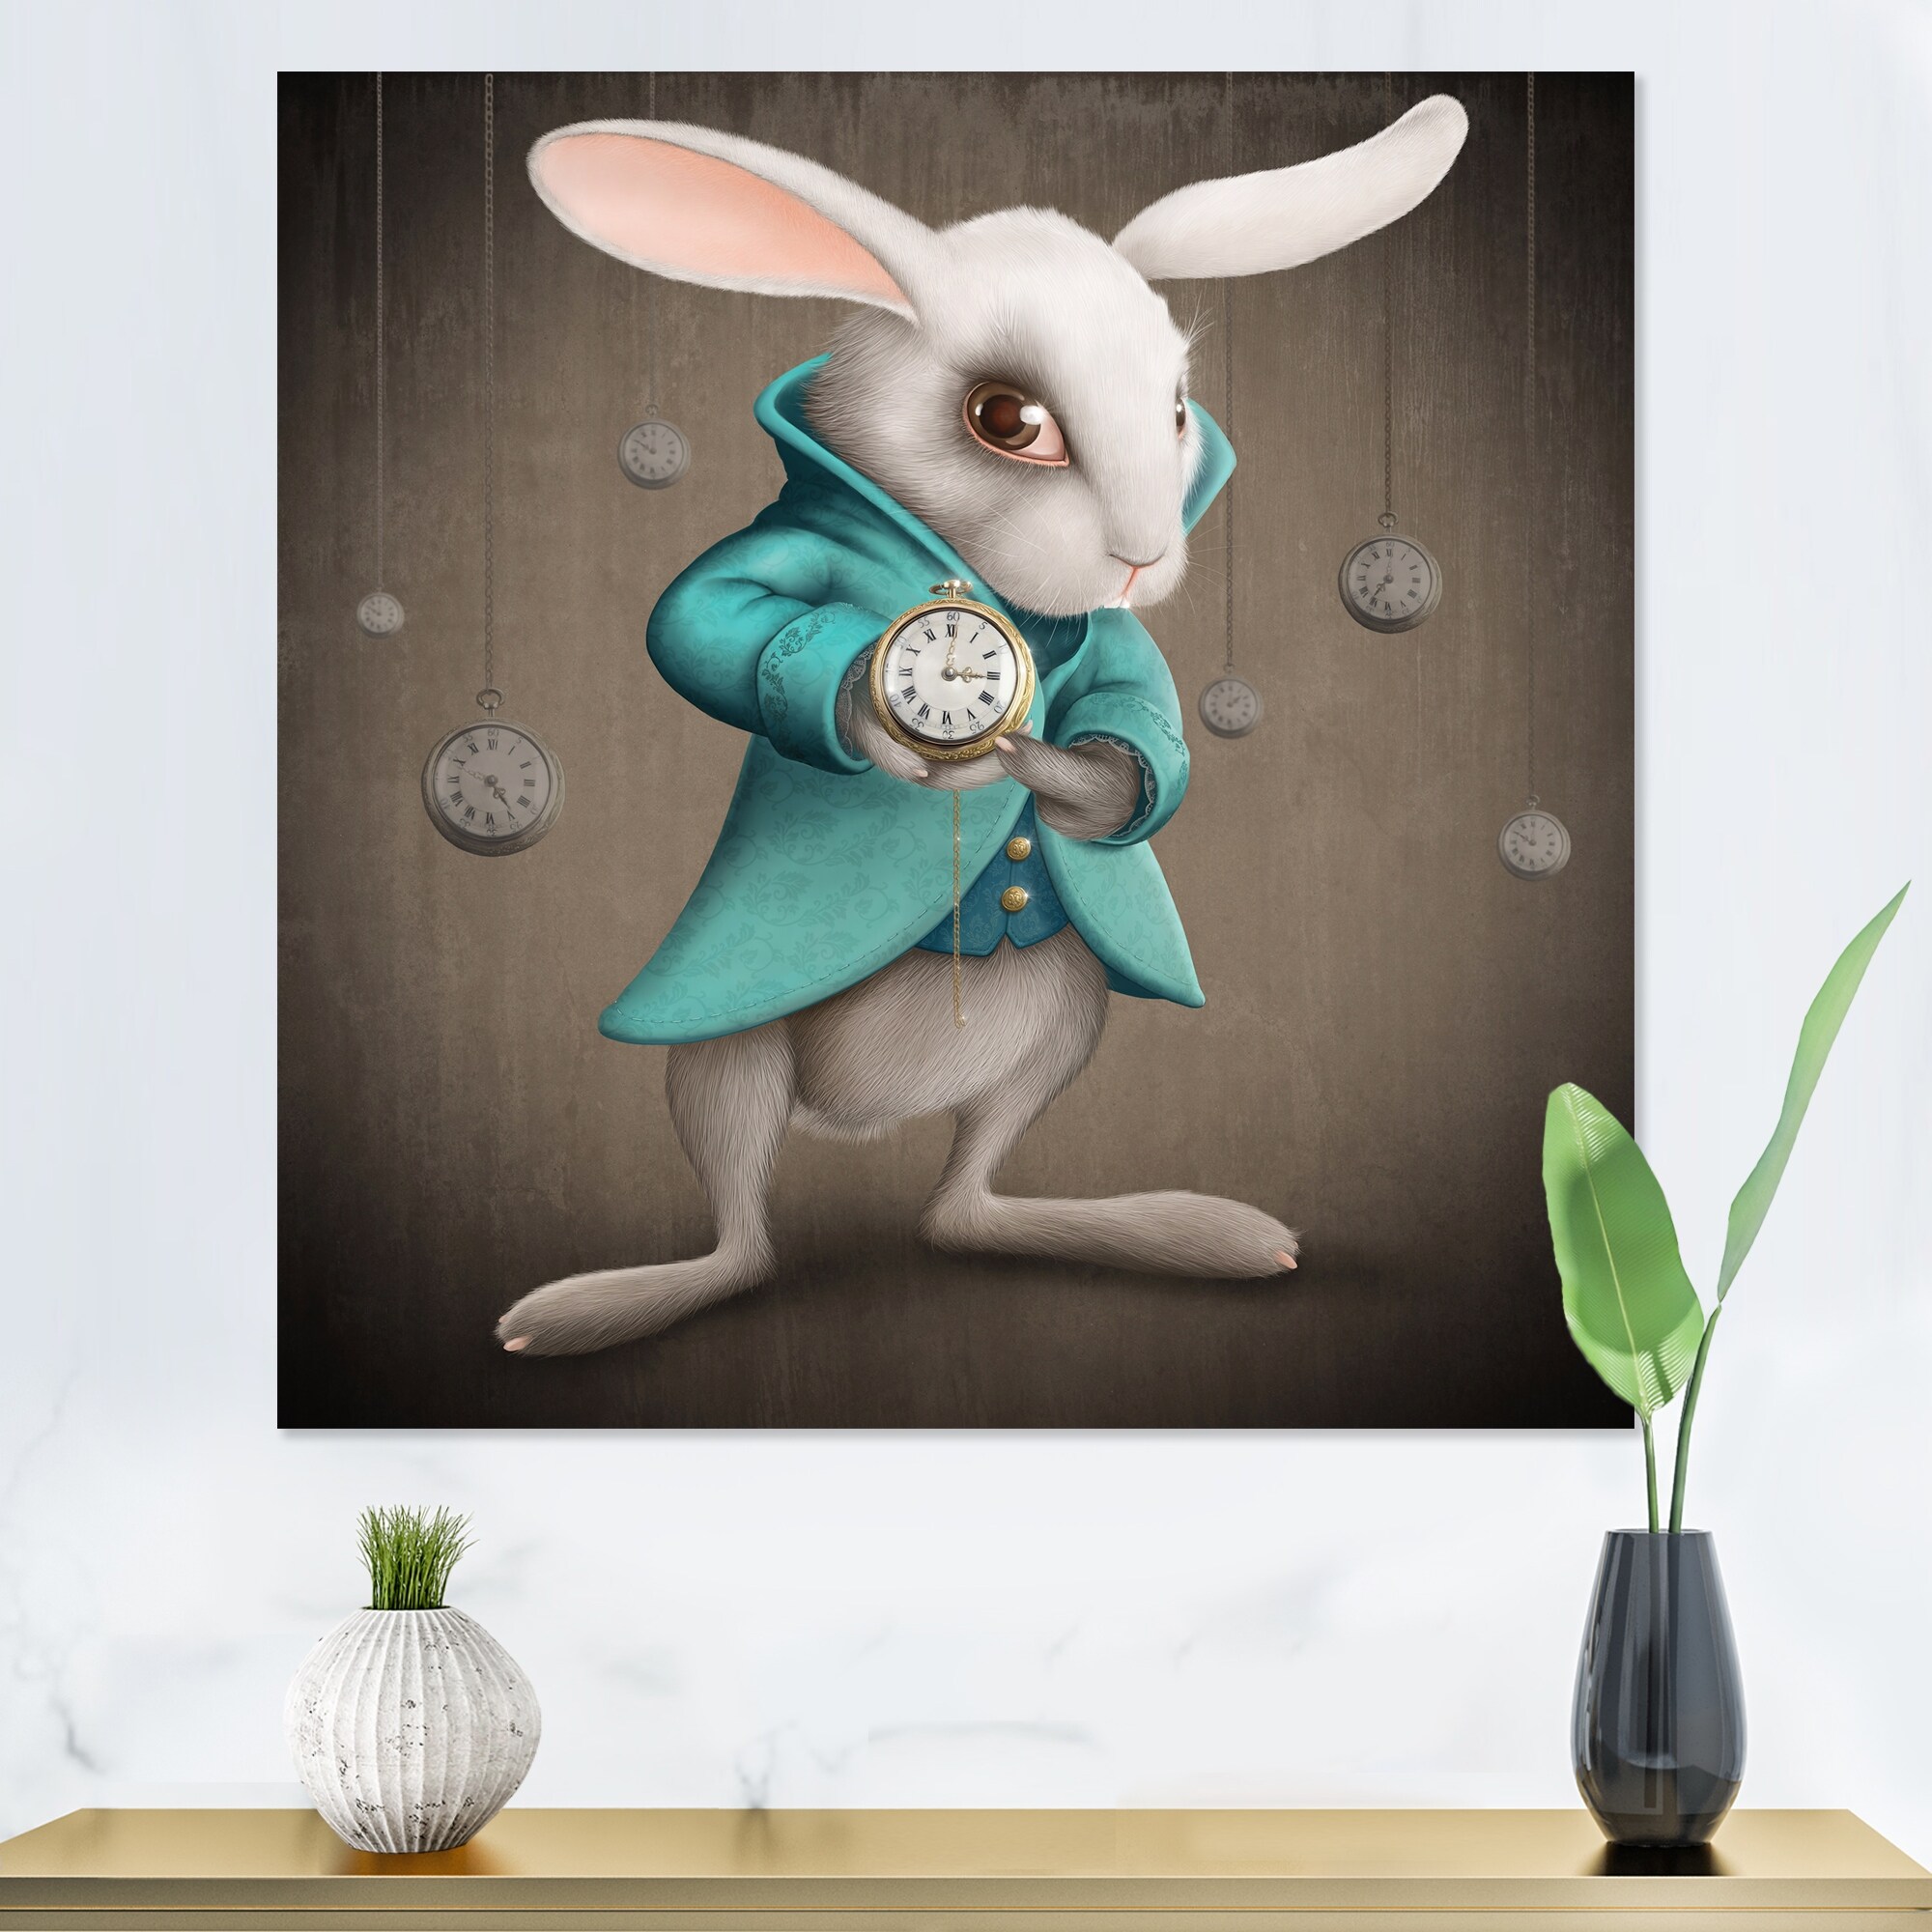 https://ak1.ostkcdn.com/images/products/is/images/direct/a10c956b7ee3bad8c7b125051d352d661401c5ae/Designart-%27White-Rabbit-Alice-In-Wonderland%27-Novelty-Canvas-Wall-Art-Print.jpg